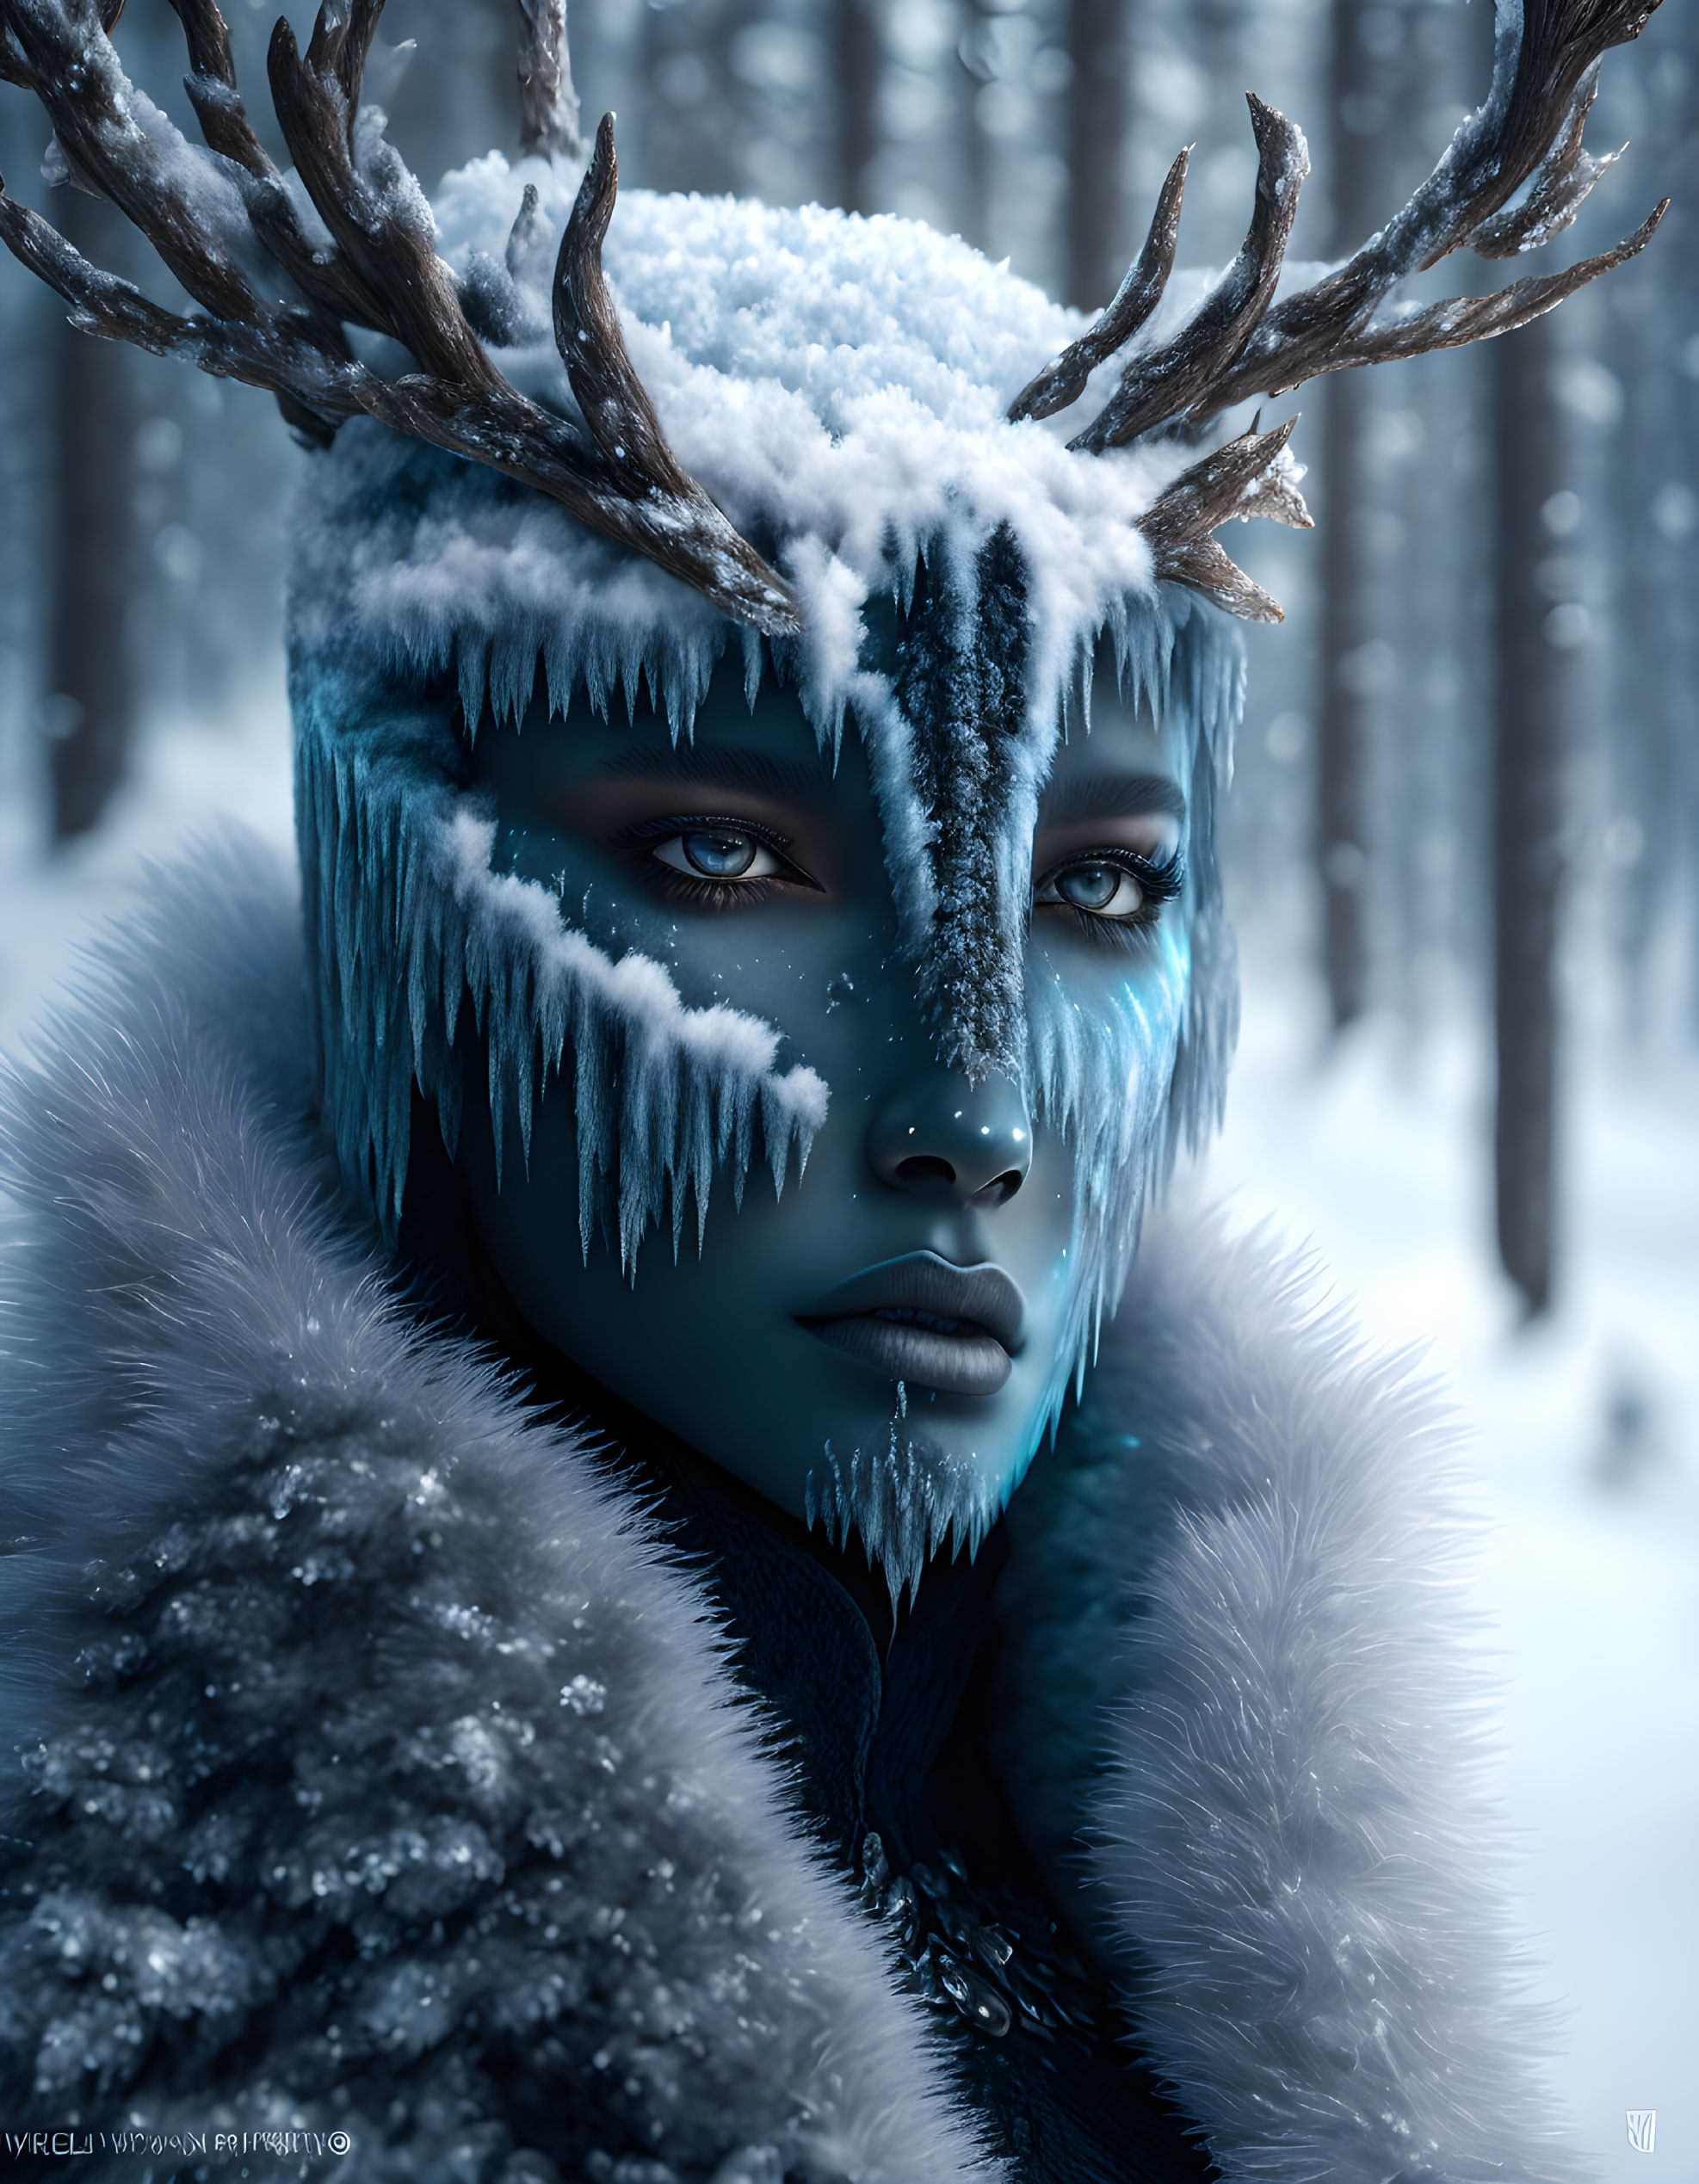 Blue-skinned fantasy character with icicle antlers, frosty makeup, and fur clothing in snowy